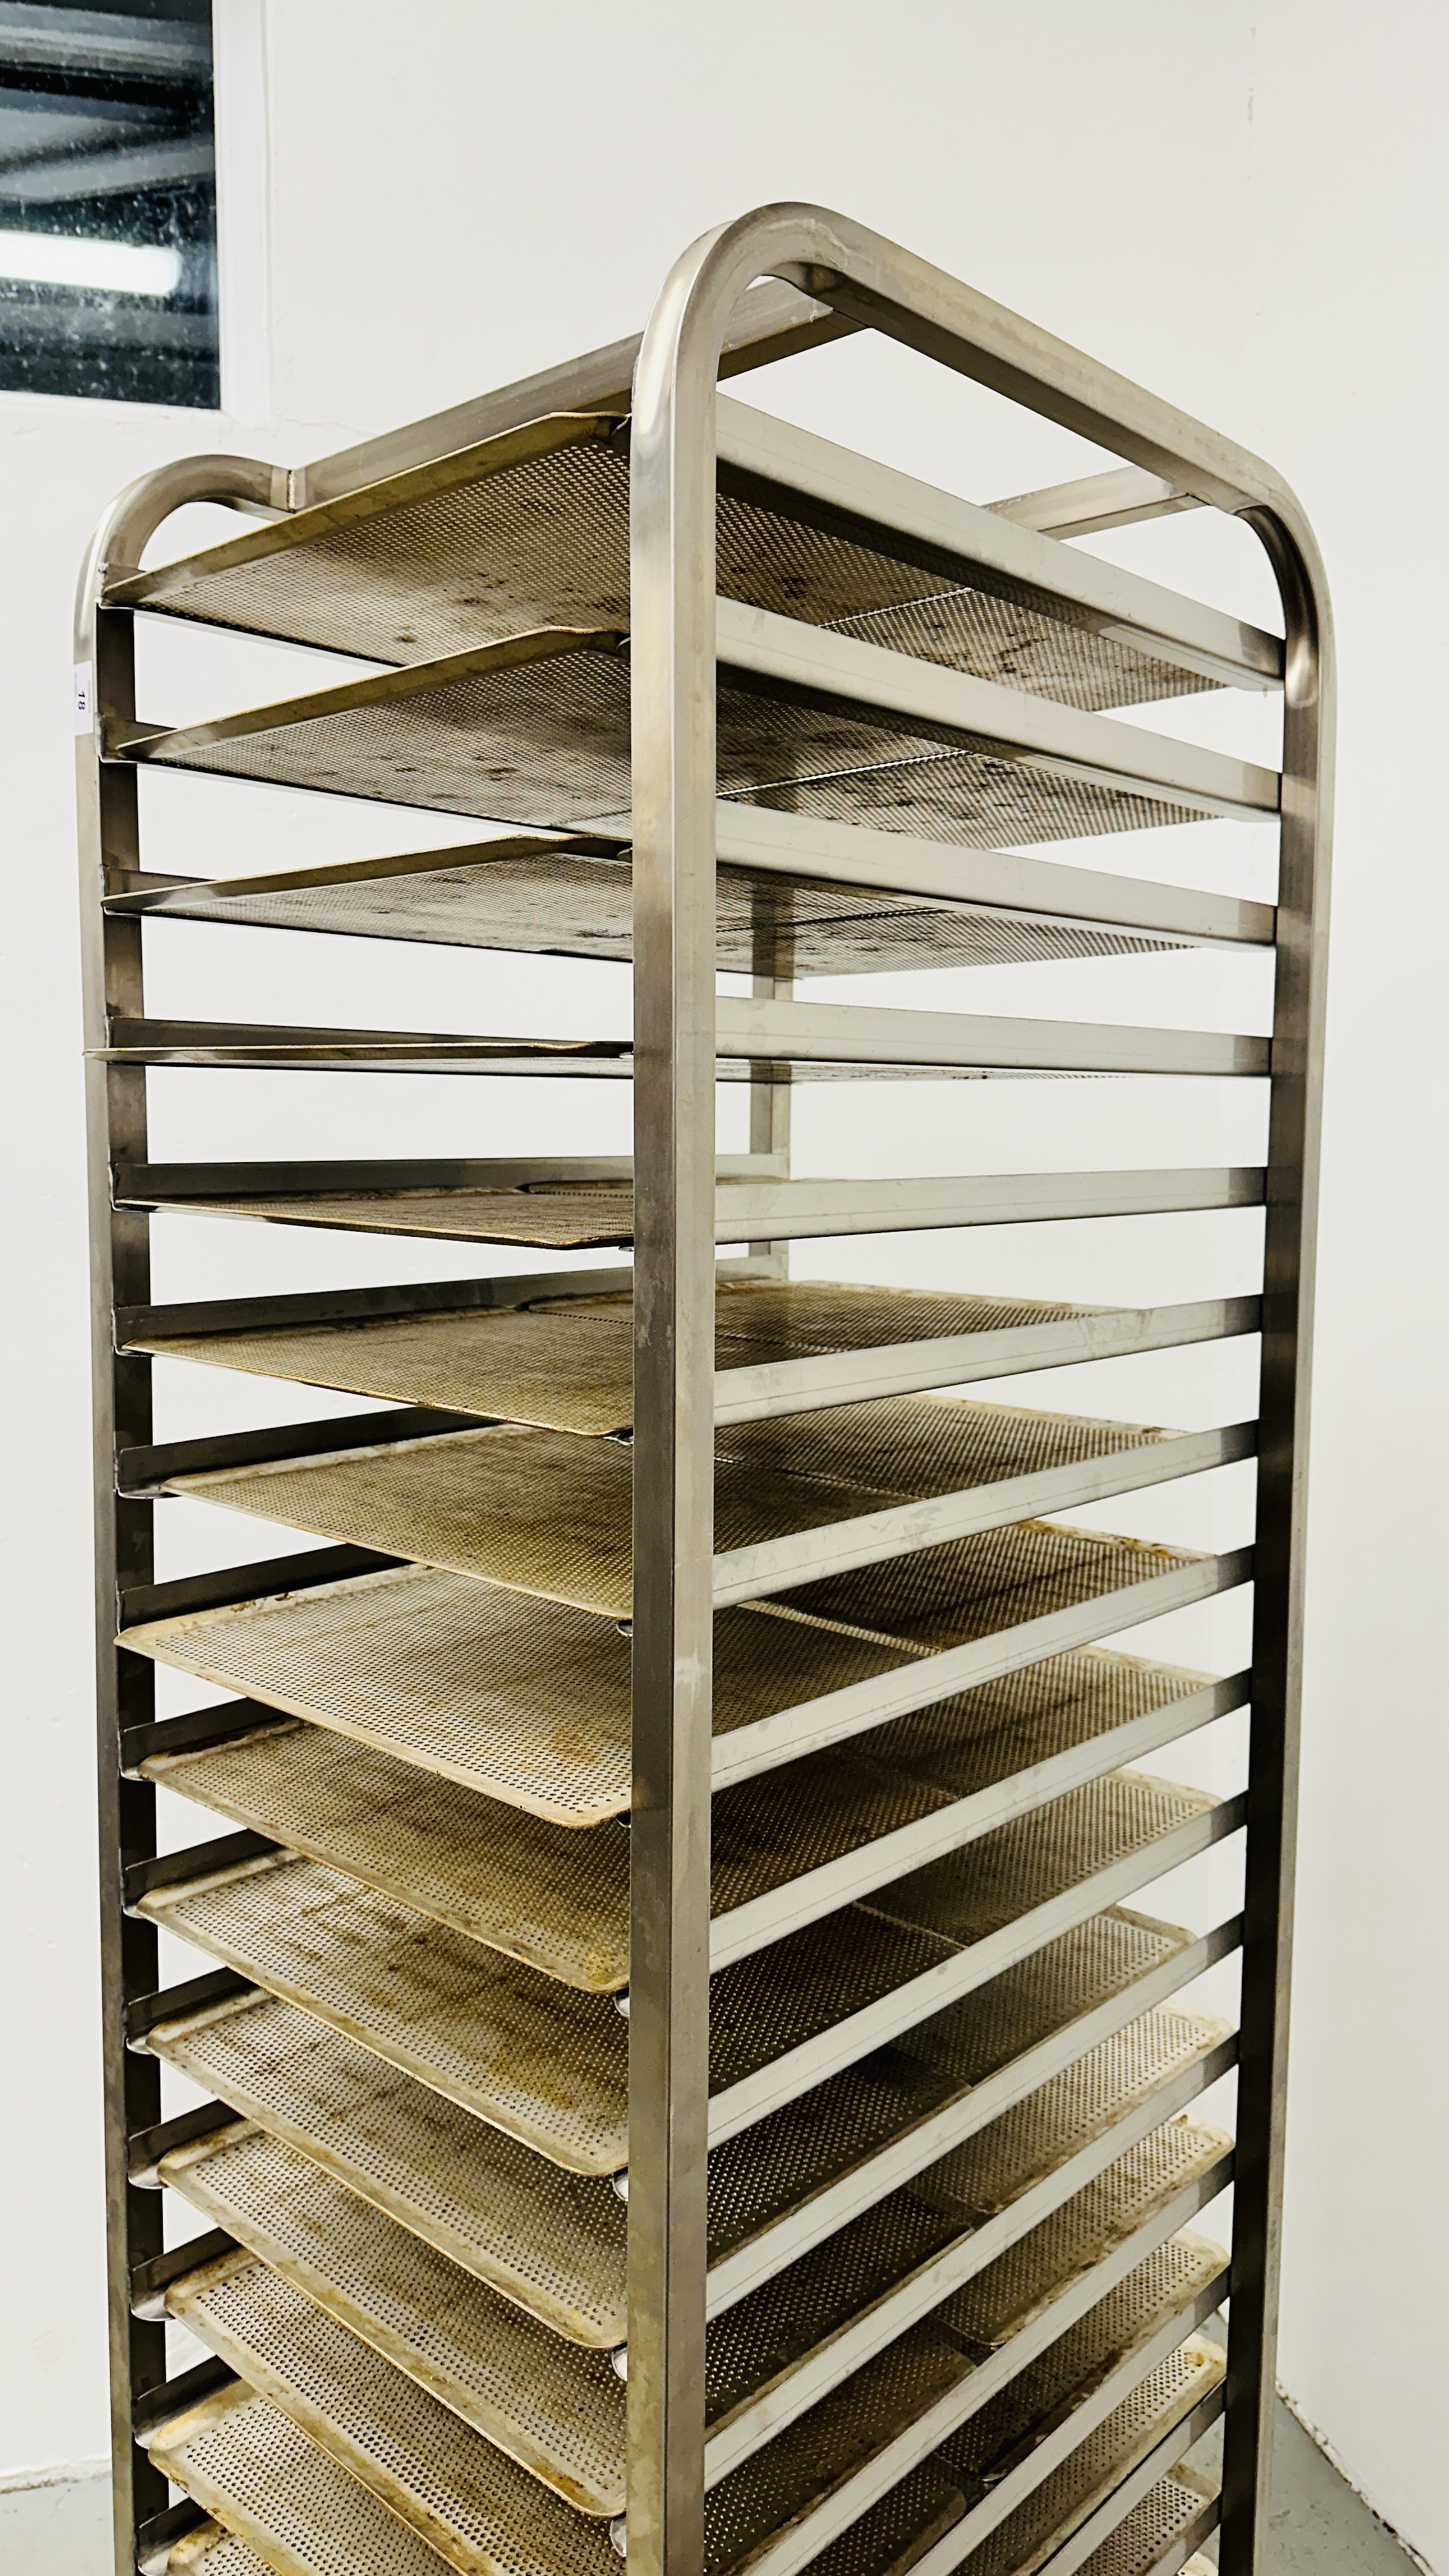 STAINLESS STEEL 20 TIER COMMERCIAL WHEELED BAKING TRAY RACK COMPLETE WITH TRAYS - HEIGHT 182CM. - Image 3 of 7